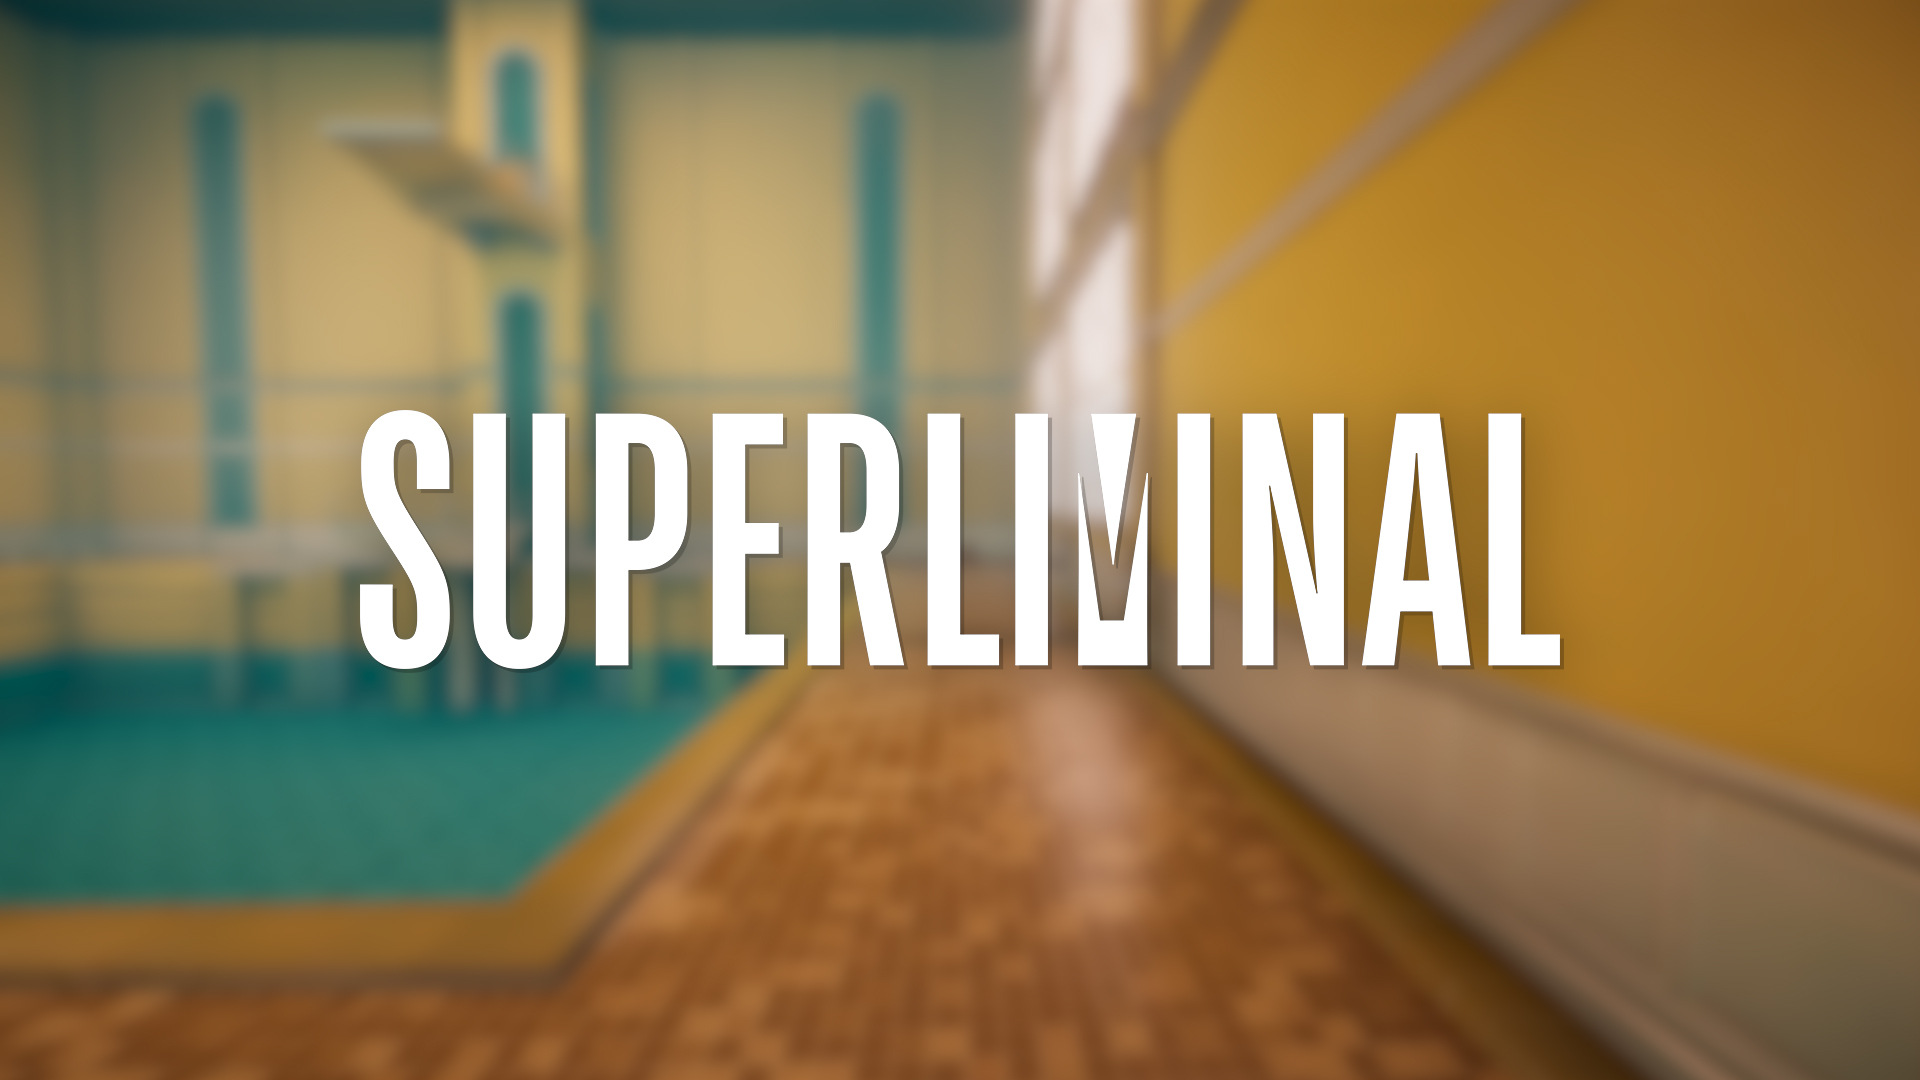 superliminal meaning